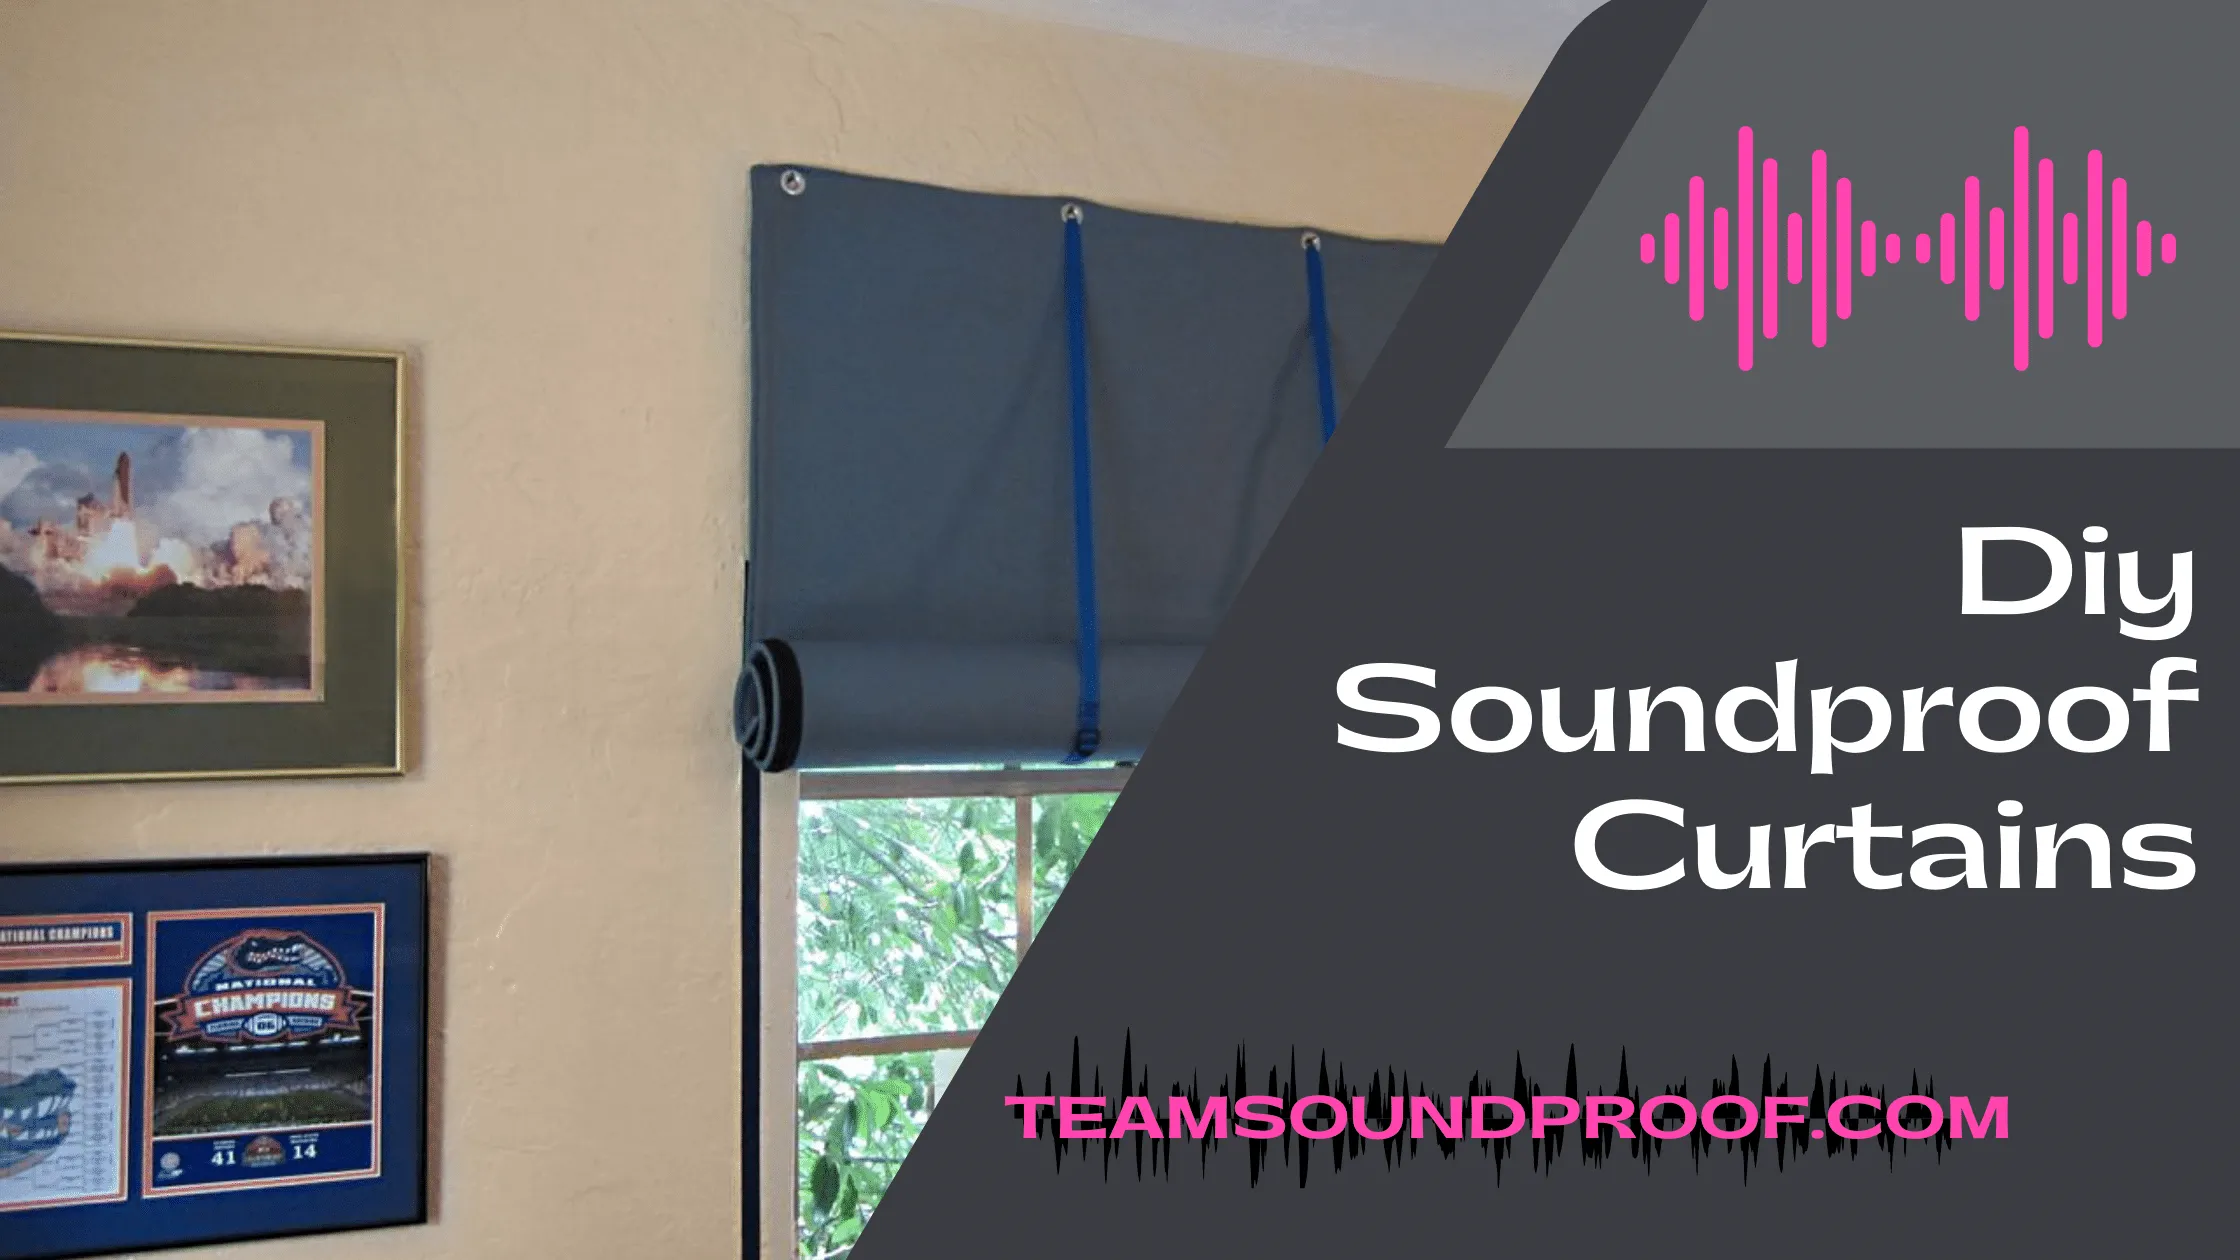 Diy Soundproof Curtains - Recommended Guide